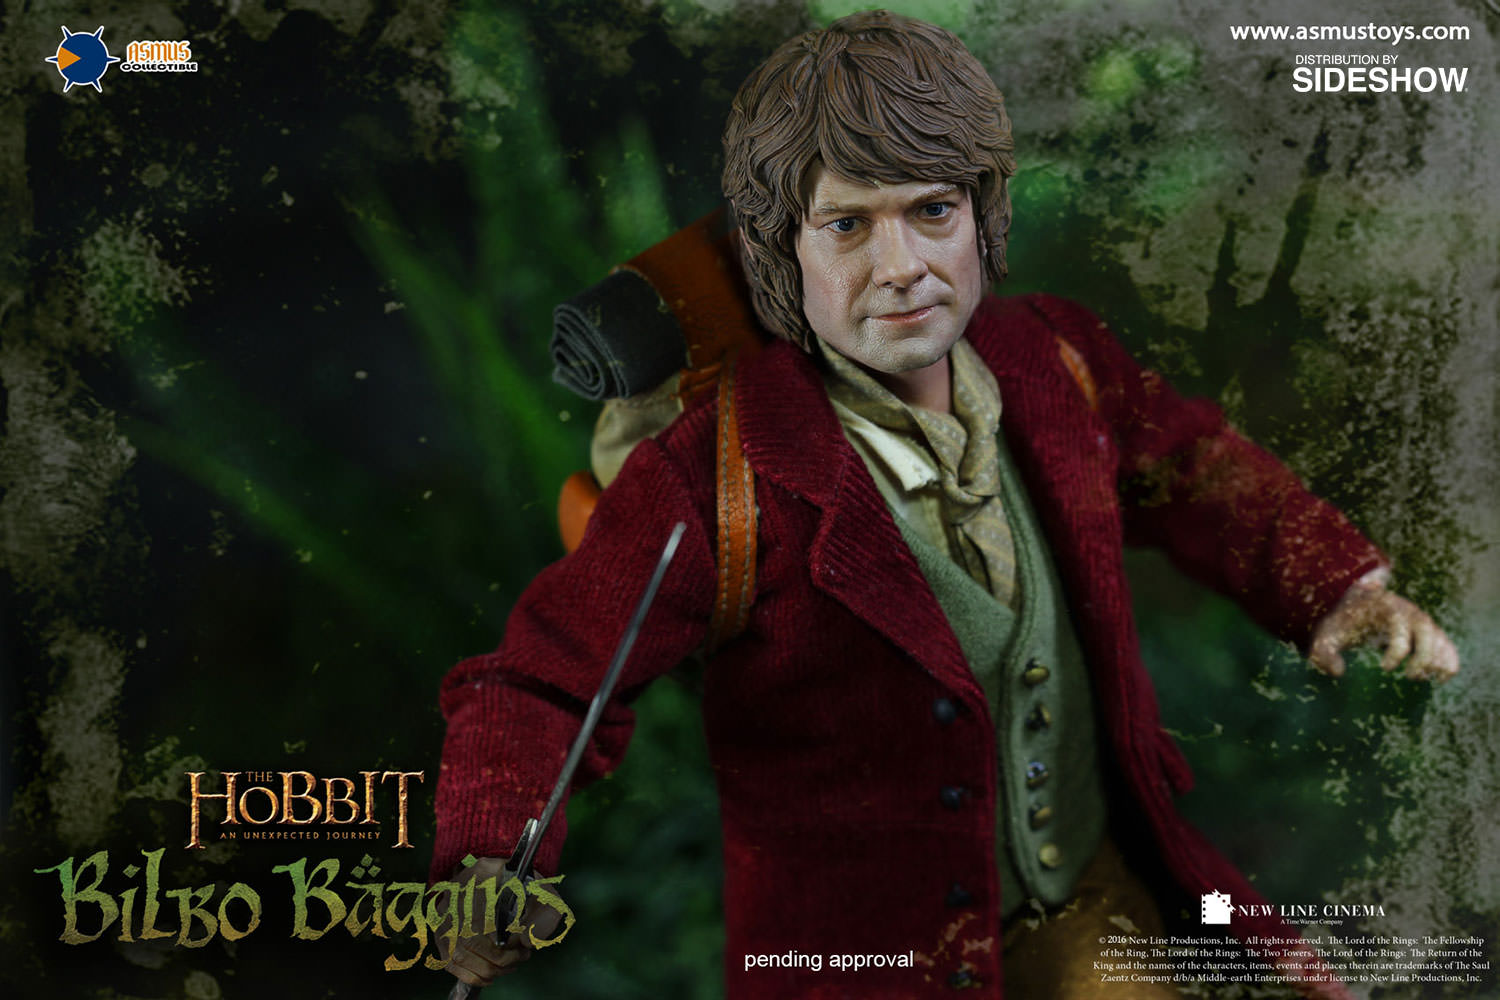 Bilbo: The Hobbit: The Lord of the Rings: Asmus-Asmus Toys